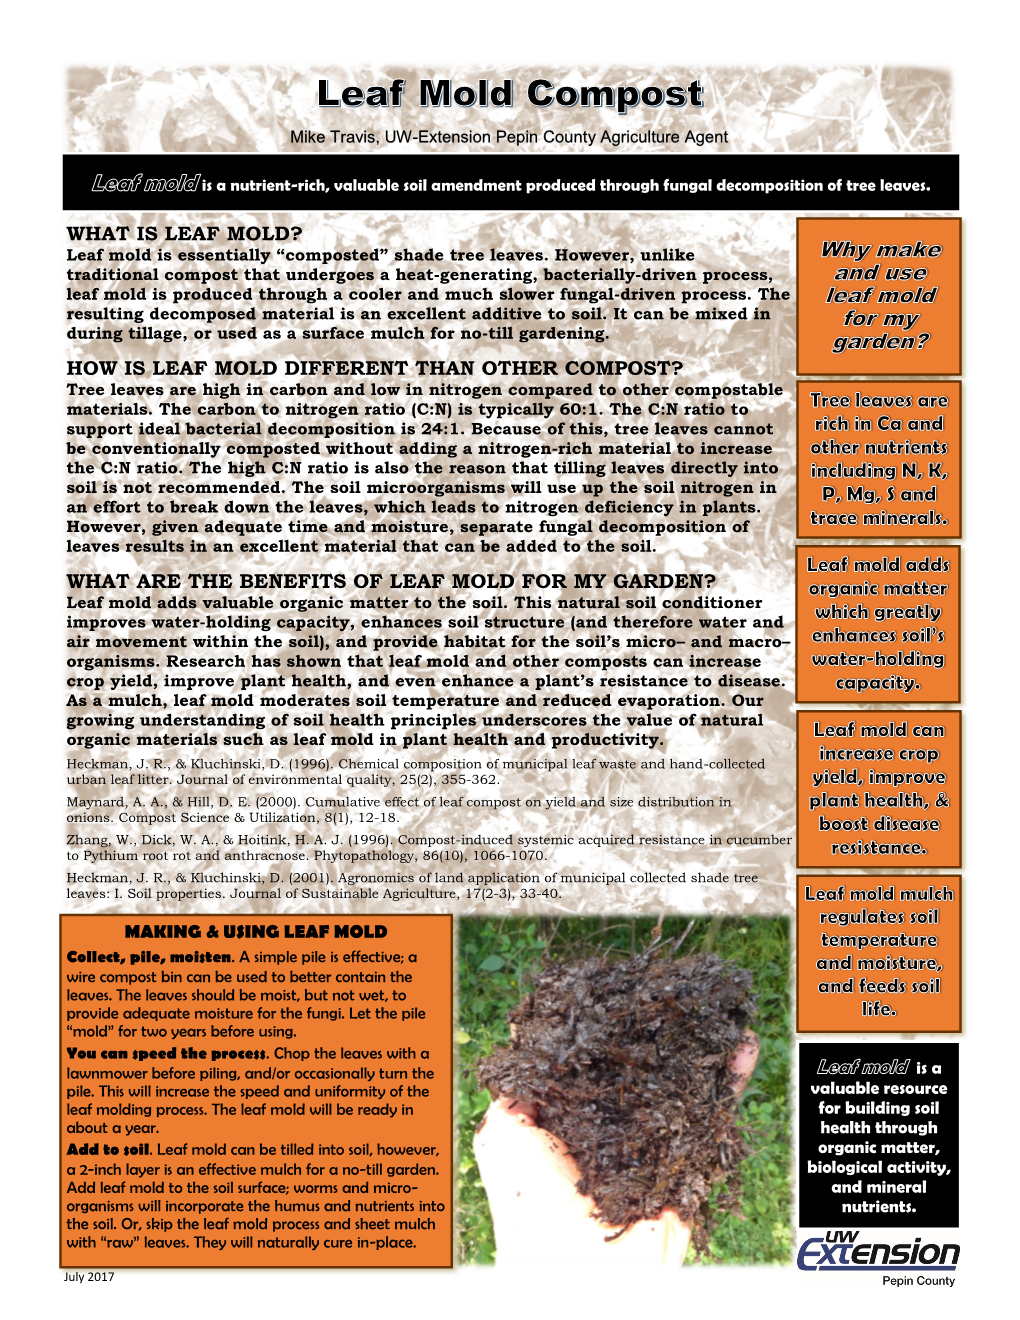 WHAT IS LEAF MOLD? Leaf Mold Is Essentially “Composted” Shade Tree Leaves